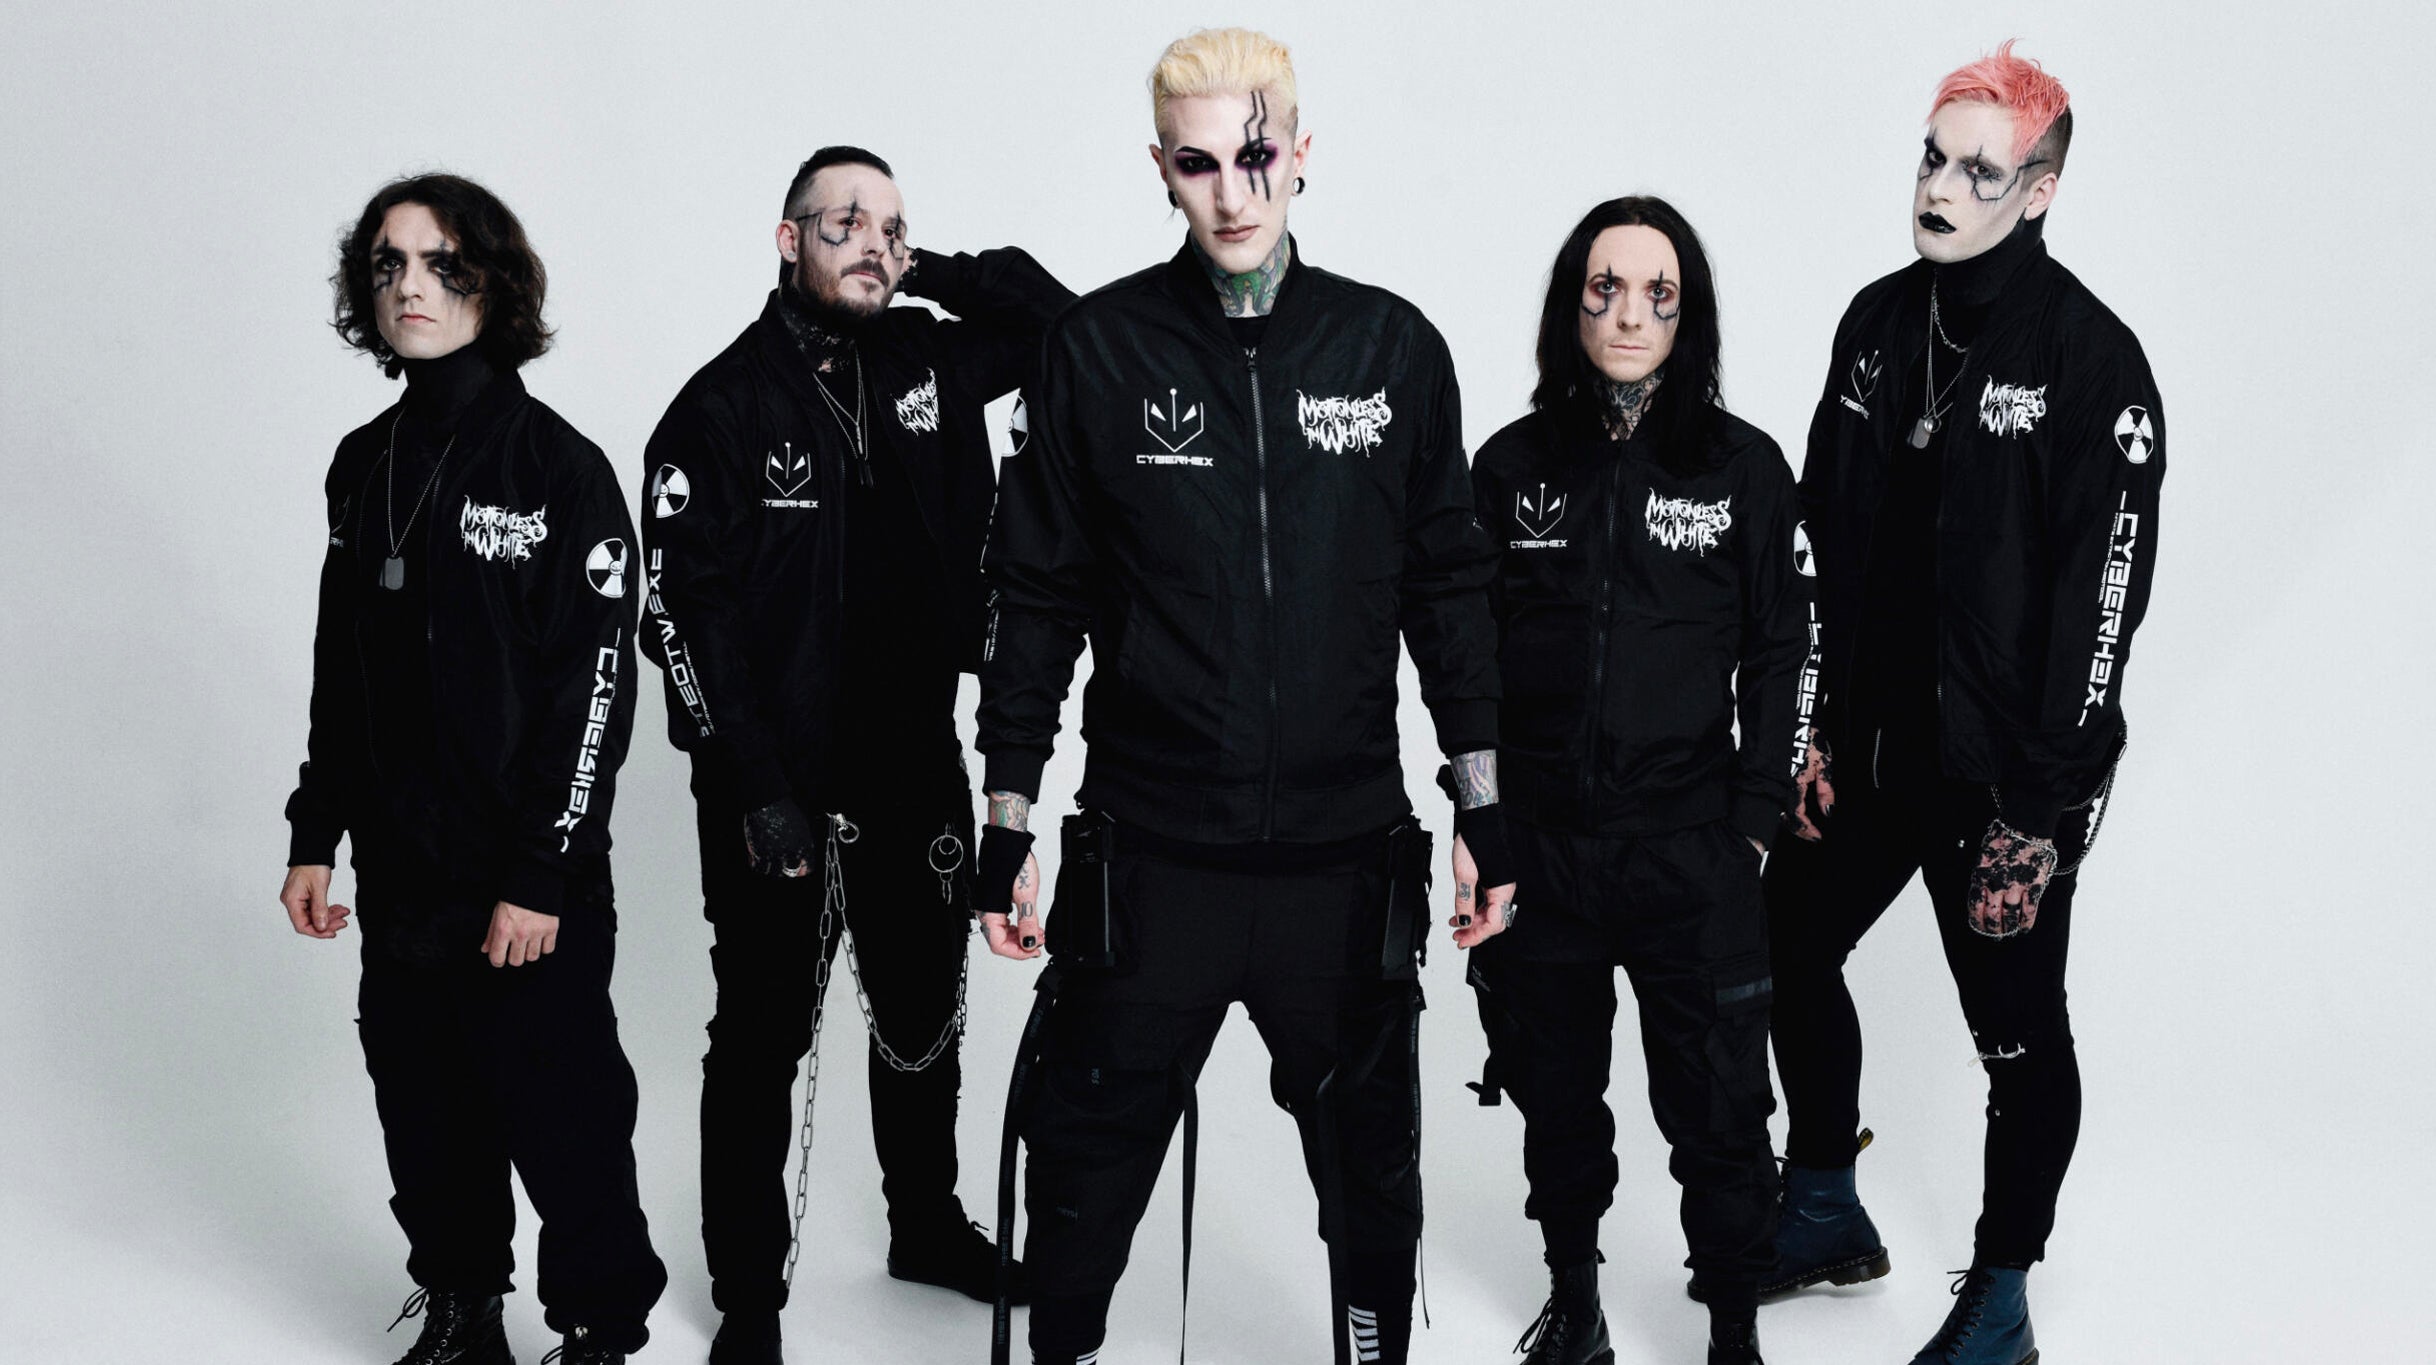 97.9X Presents Motionless In White - Apocalypse Fest in Wilkes-Barre promo photo for Official Platinum Onsale presale offer code